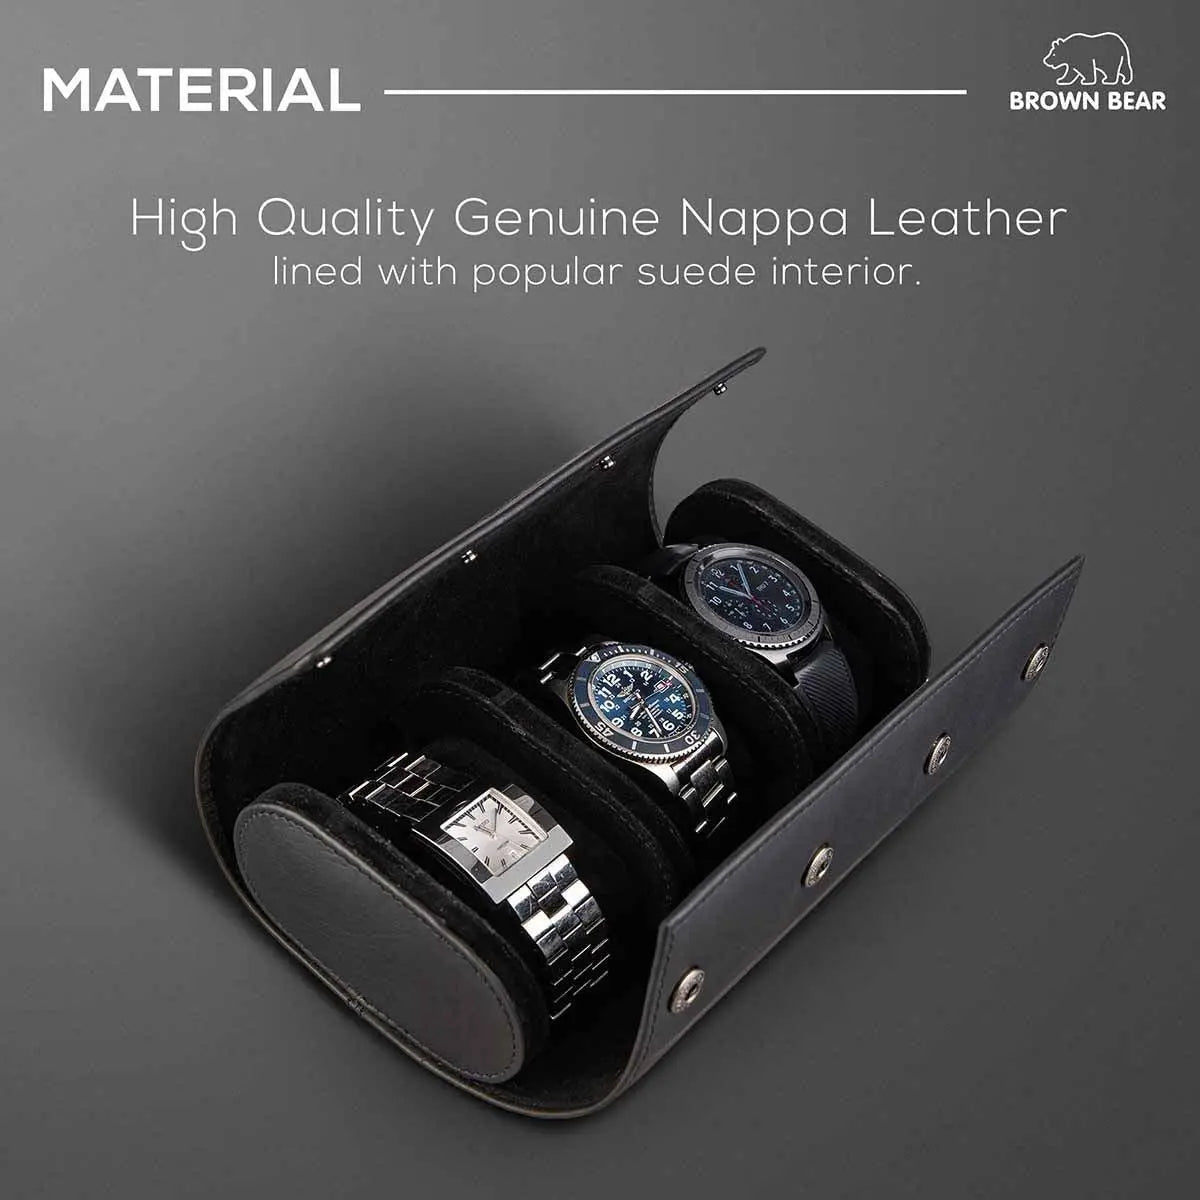 Watch Cases & Watch Boxes – Case Elegance